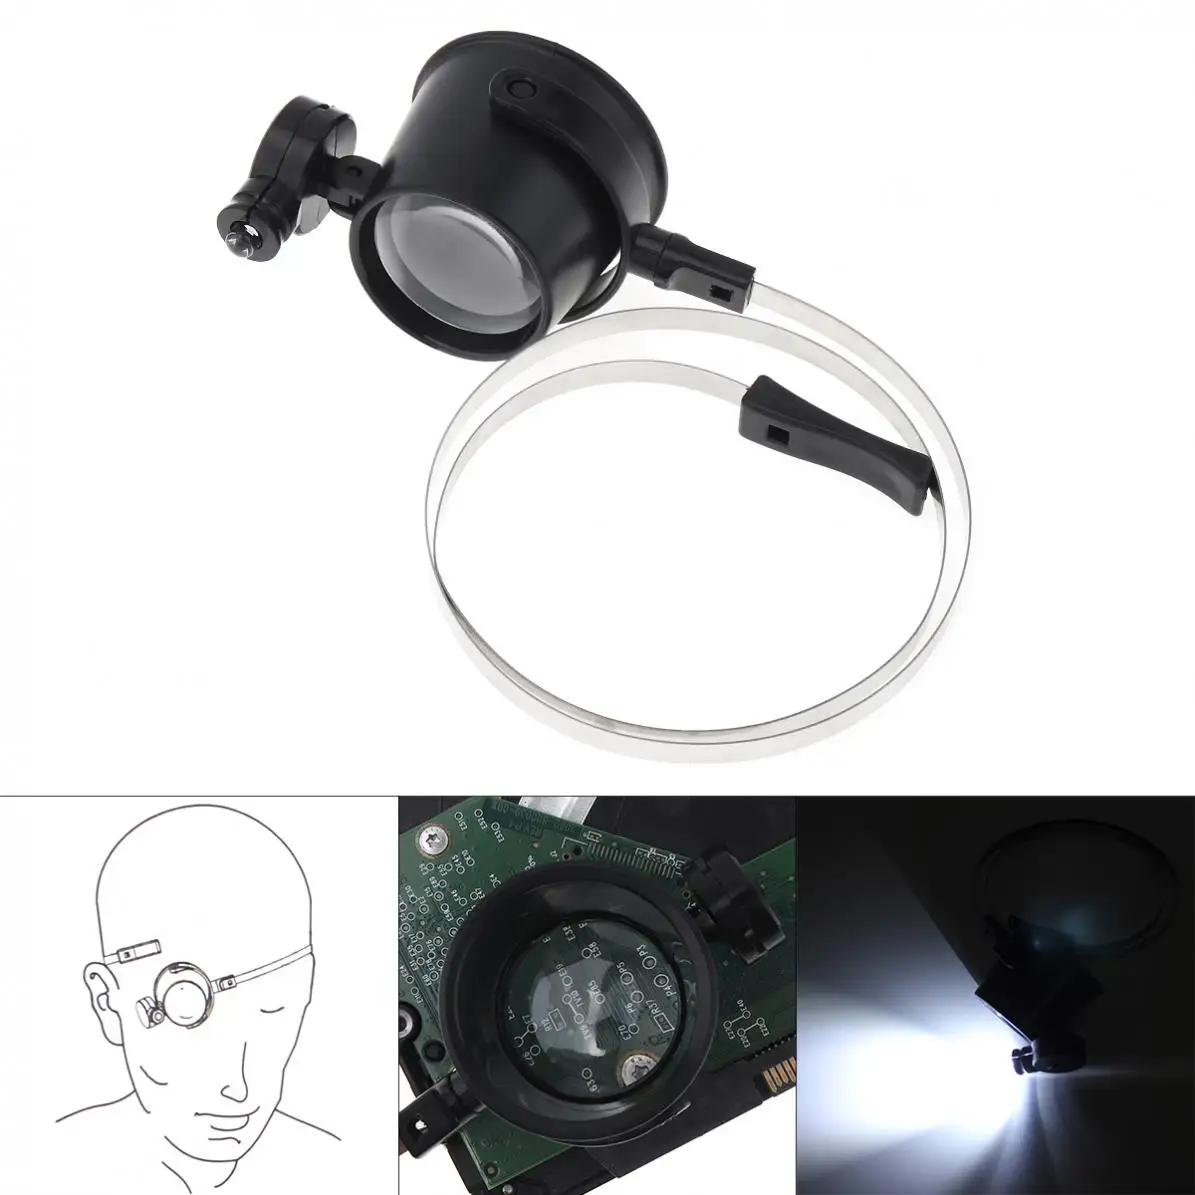 

Wearing Magnifiers 15X ABS Adjustable Wearable Eyeless Pliers Magnifier with LED Lights for Repairing / Reading Magnifiers